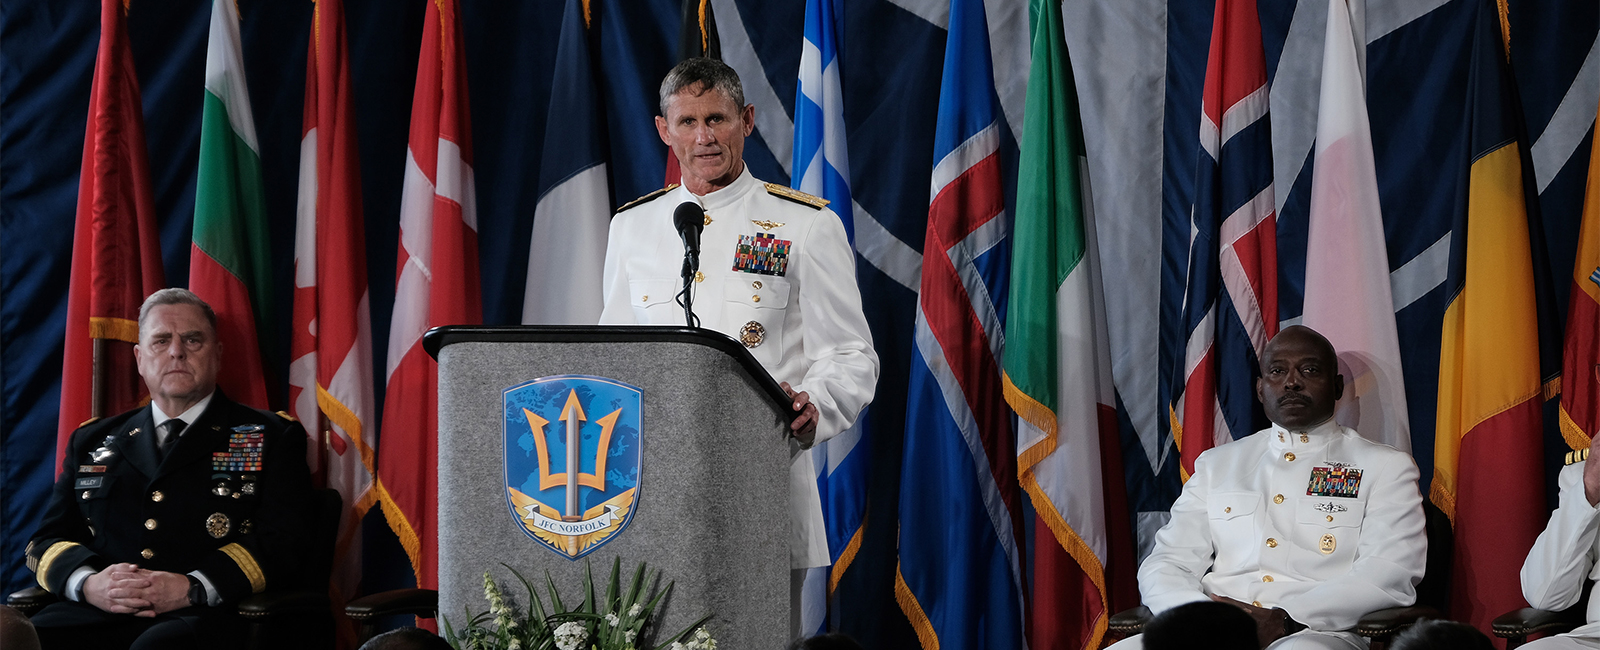 Vice Adm. Andrew Lewis, commander of Joint Force Command Norfolk delivers remarks at the Joint Force Command Norfolk Full Operational Capability ceremony.